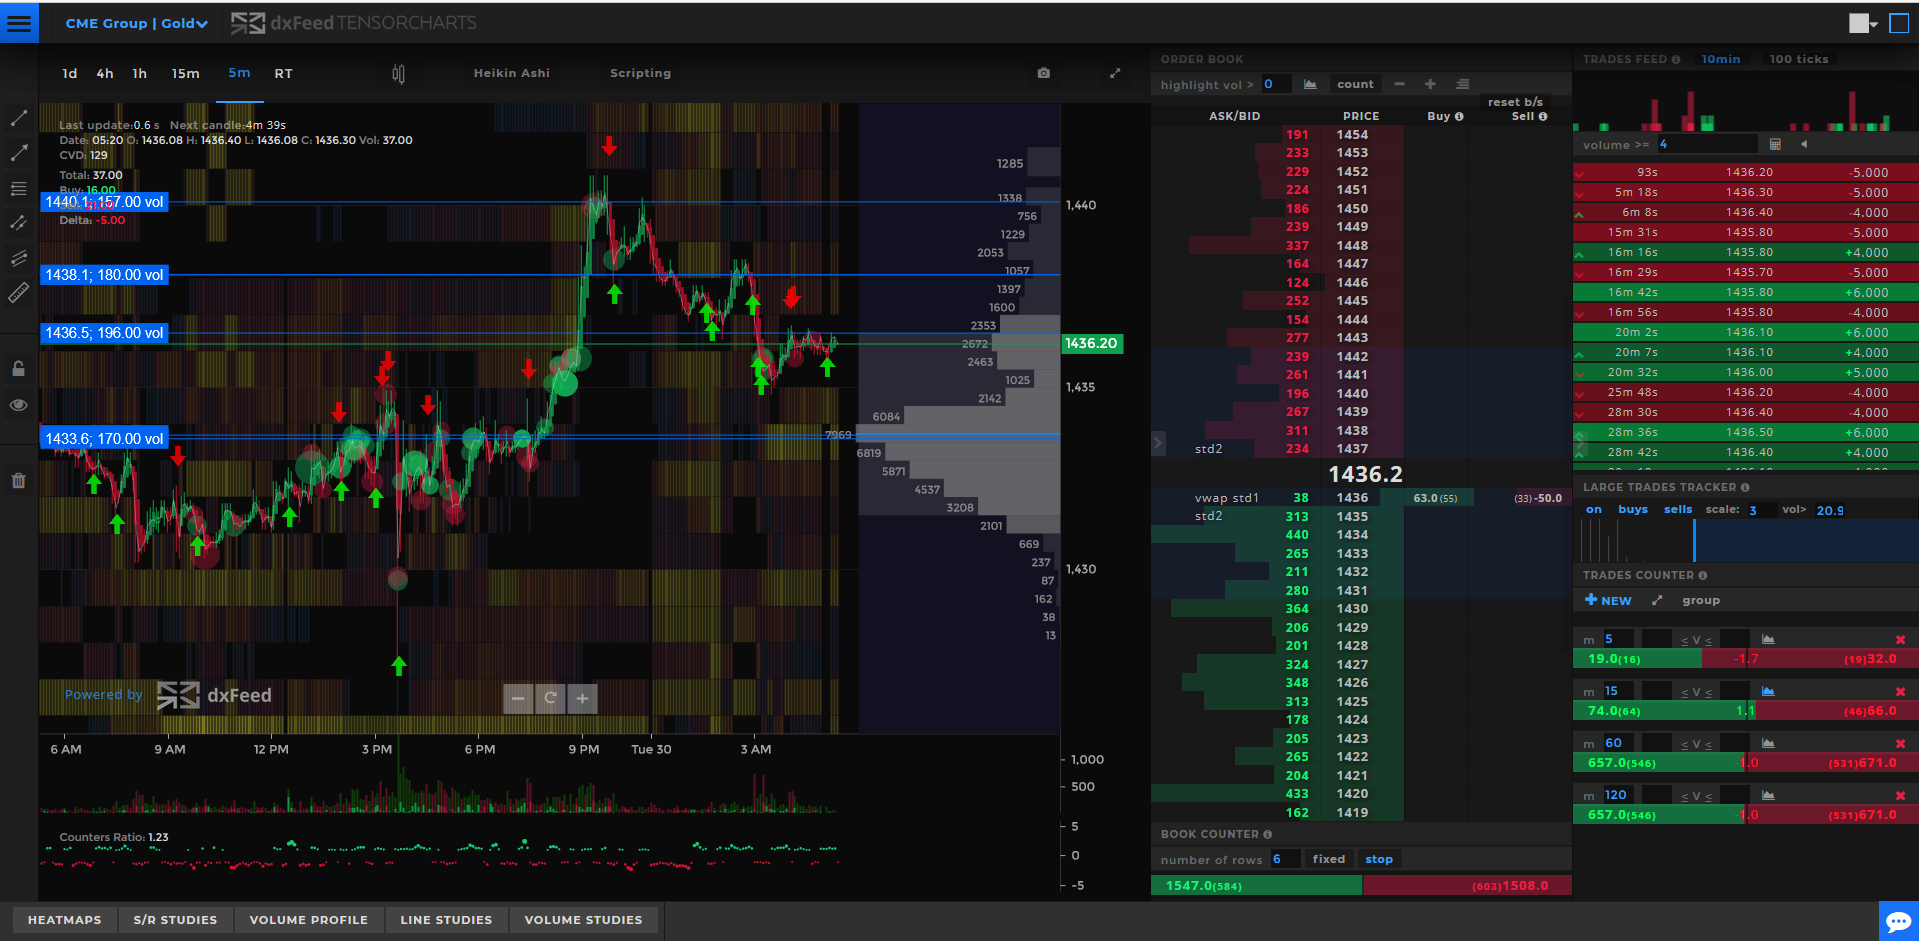 Profile ordered. Tensorcharts. DXFEED. Volume Counter. Tensorchart Liqudations.